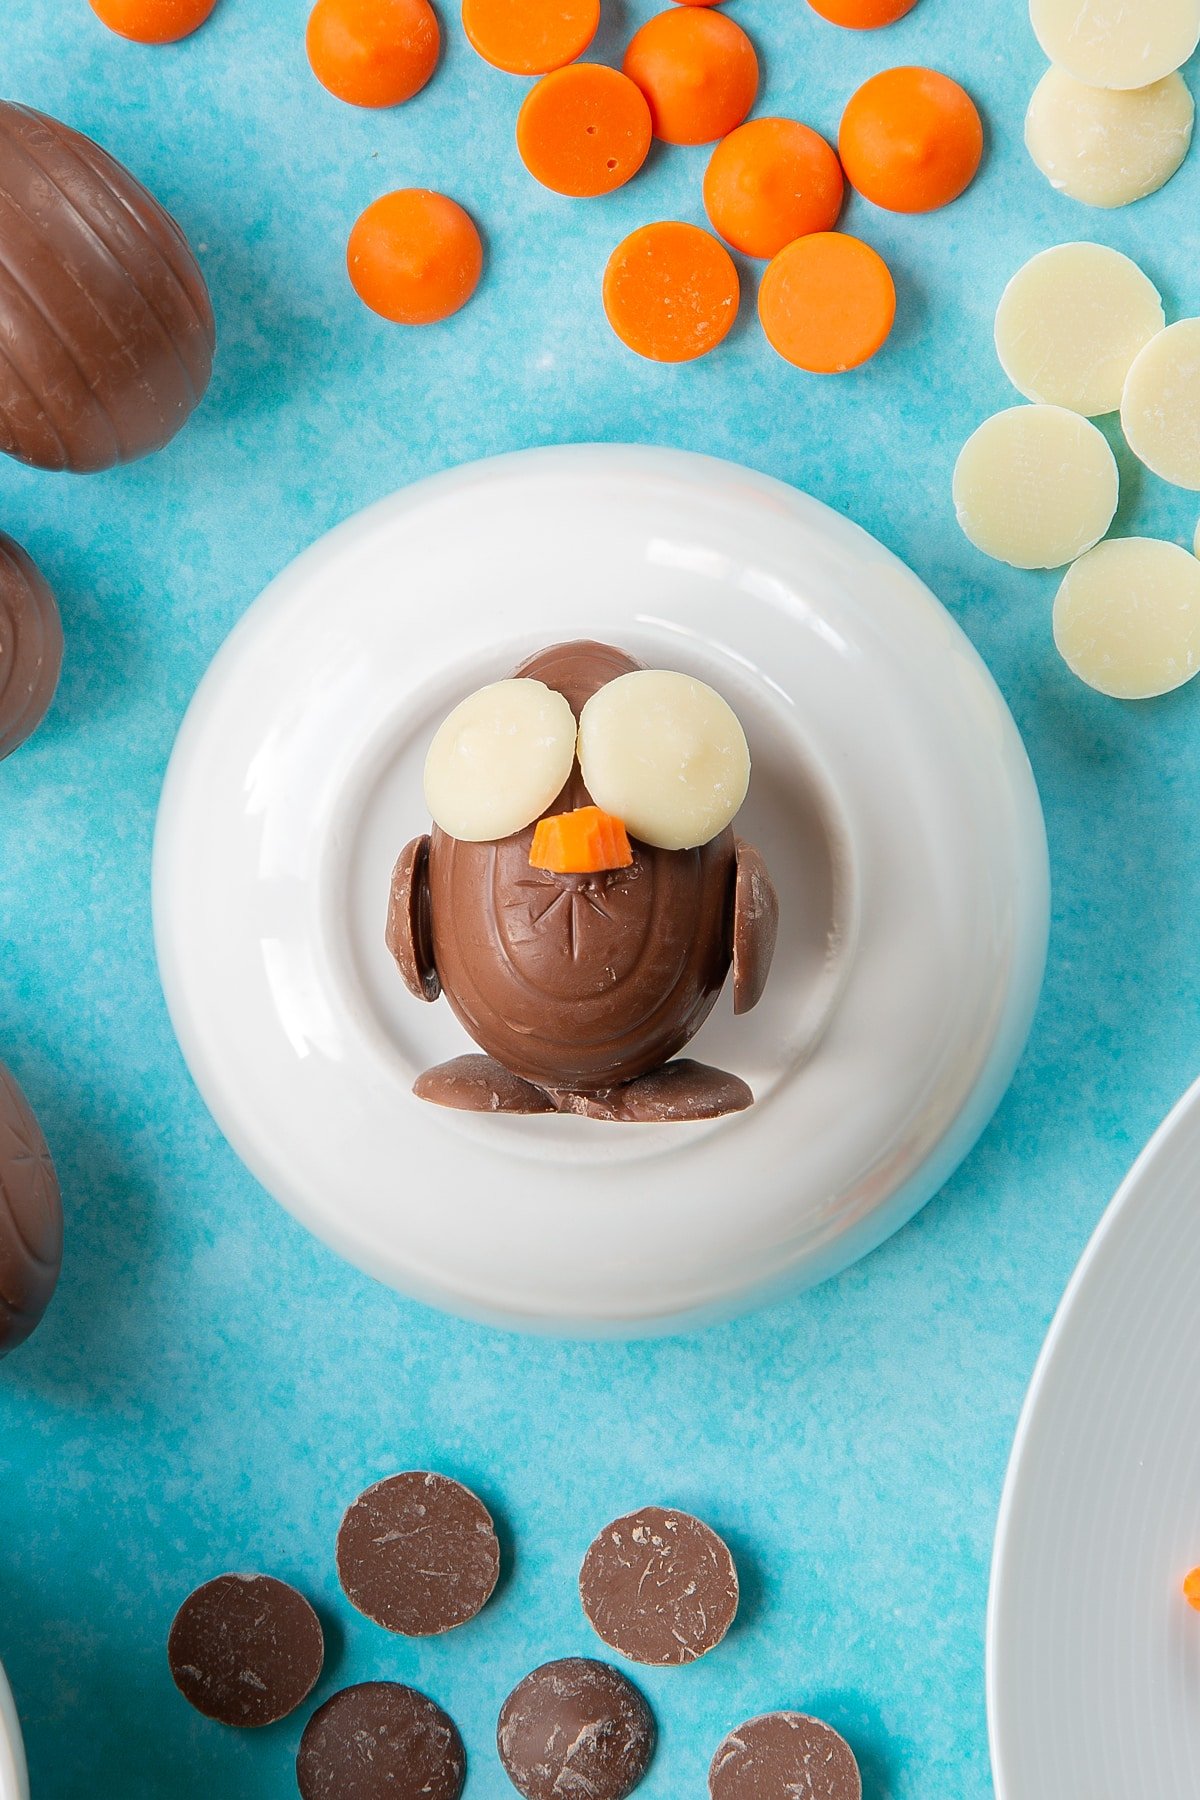 A creme egg is decorated with chocolate buttons to resemble an Easter chick. It rests on a bowl, surrounded by ingredients to make chocolate chicks.